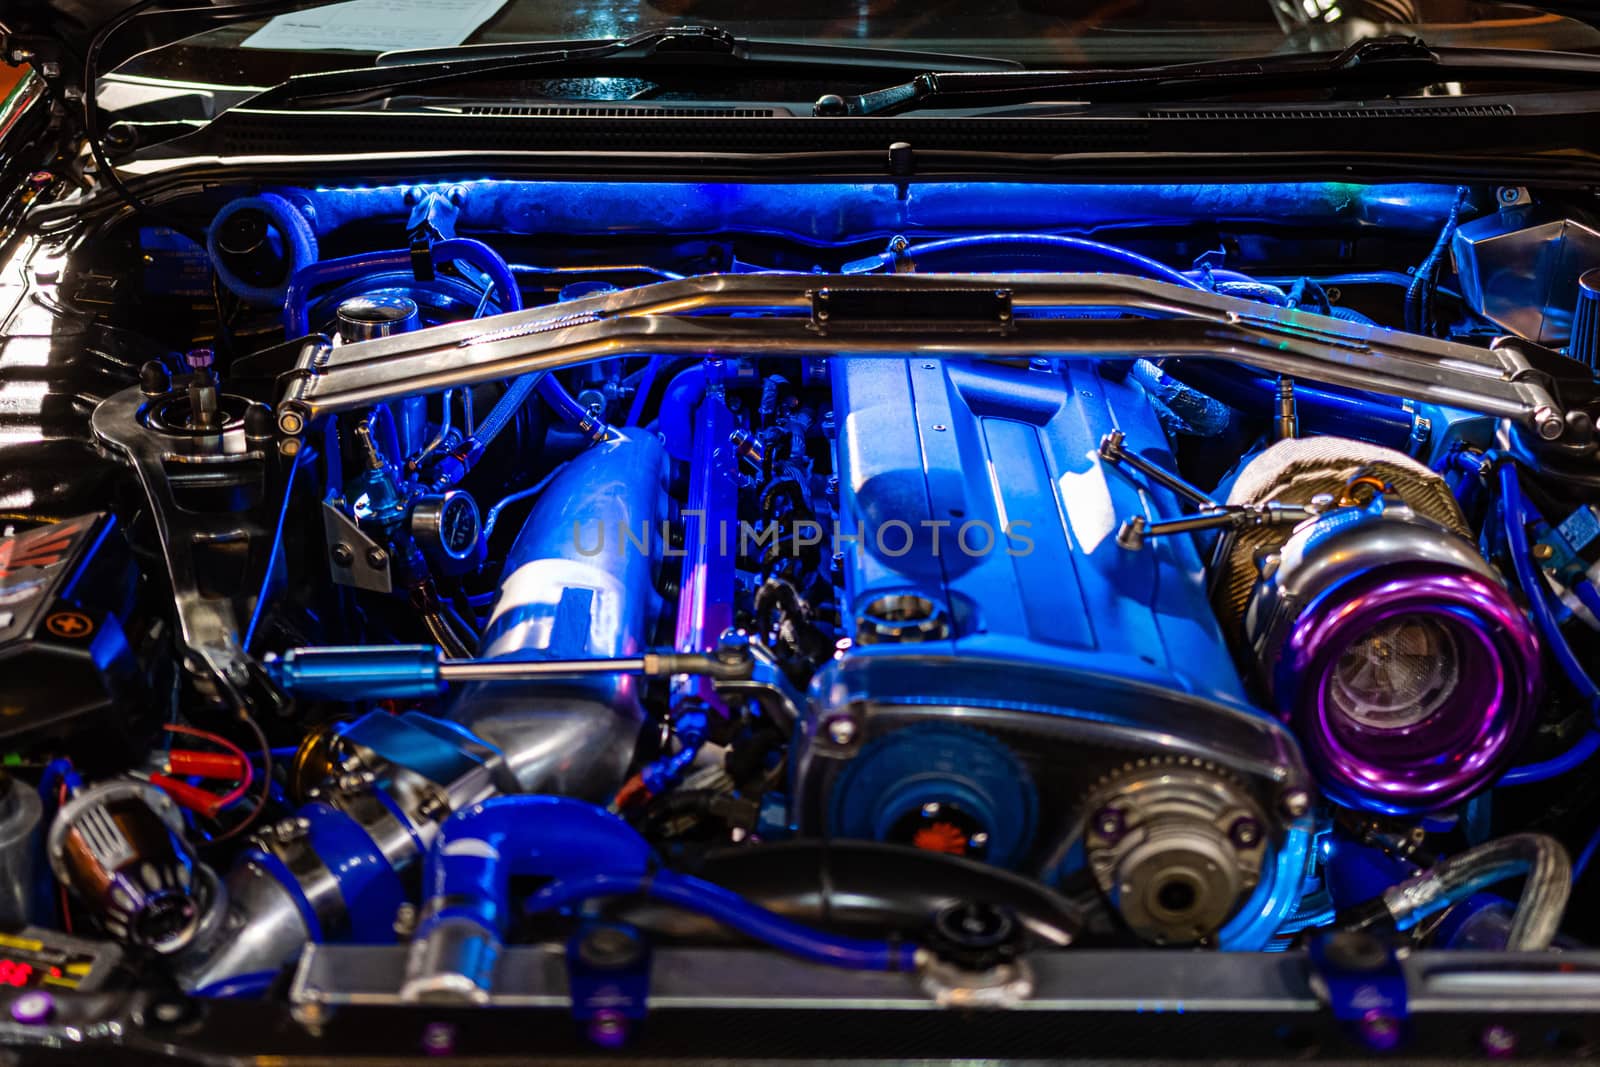 The sports car engine is illuminated with blue neon lights - image